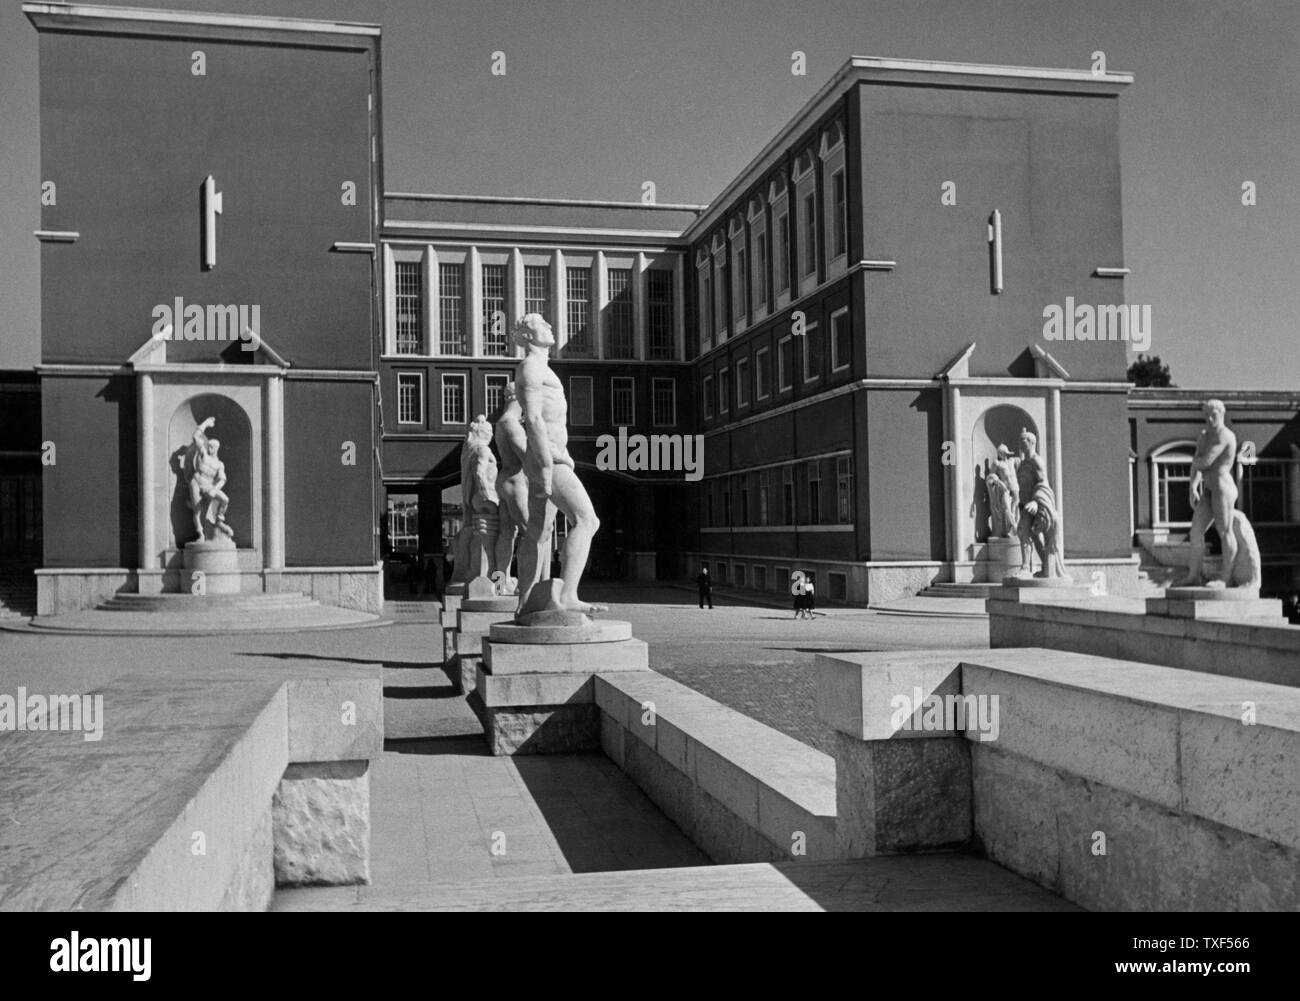 Italie, Rome, foro Mussolini, 30s Banque D'Images